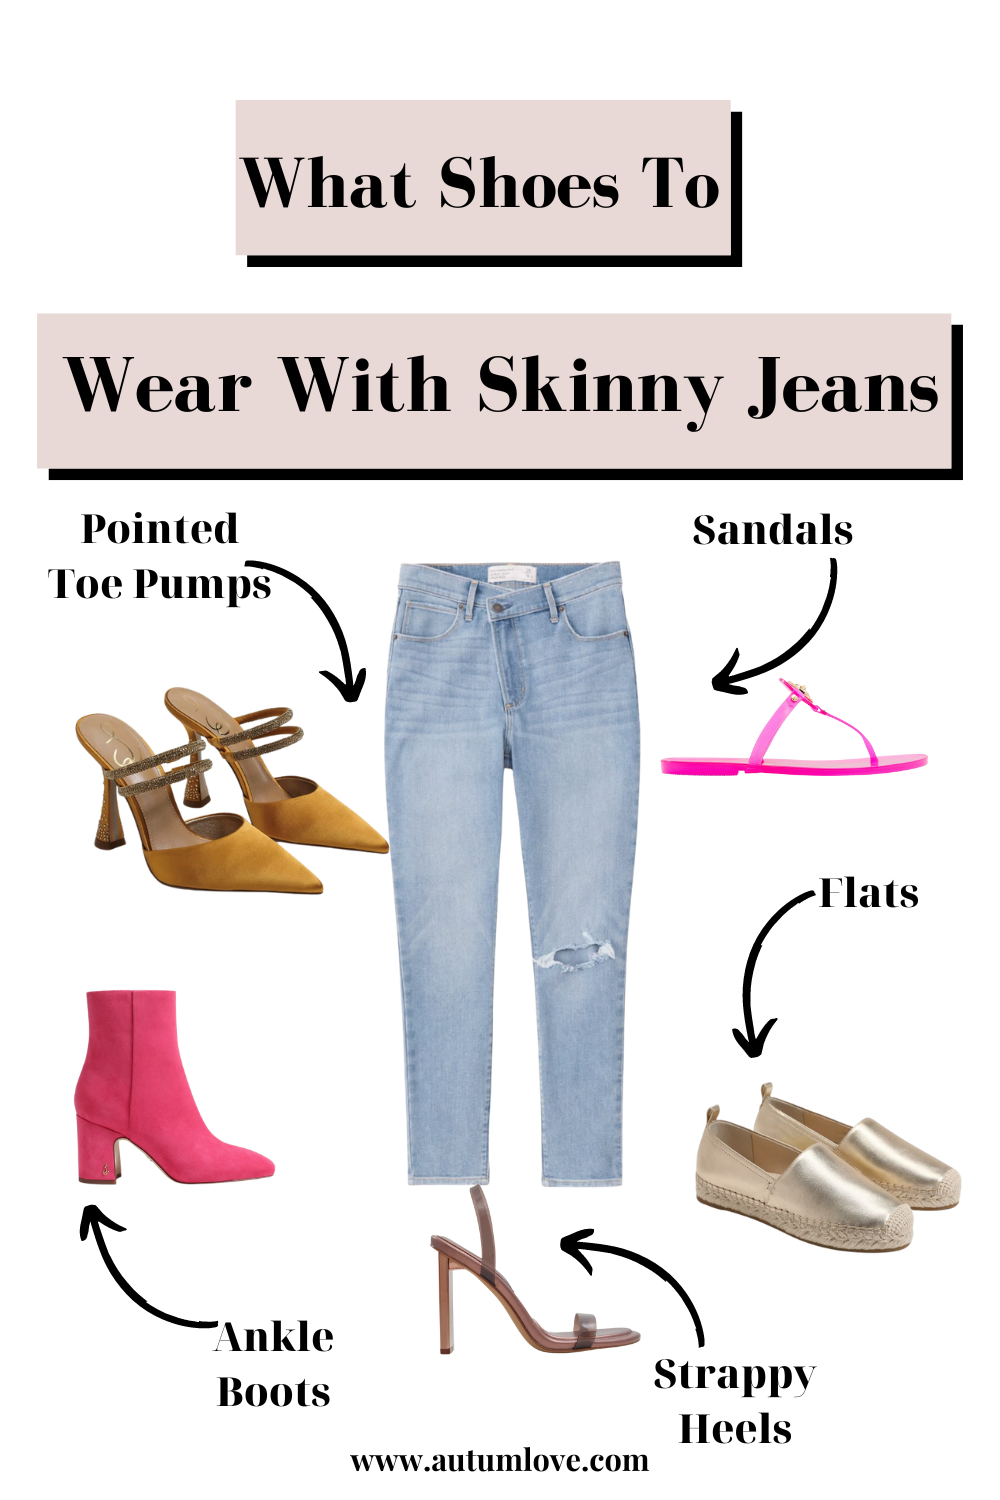 How to Style Straight Leg Jeans - Tips for Shoes, Tops, and